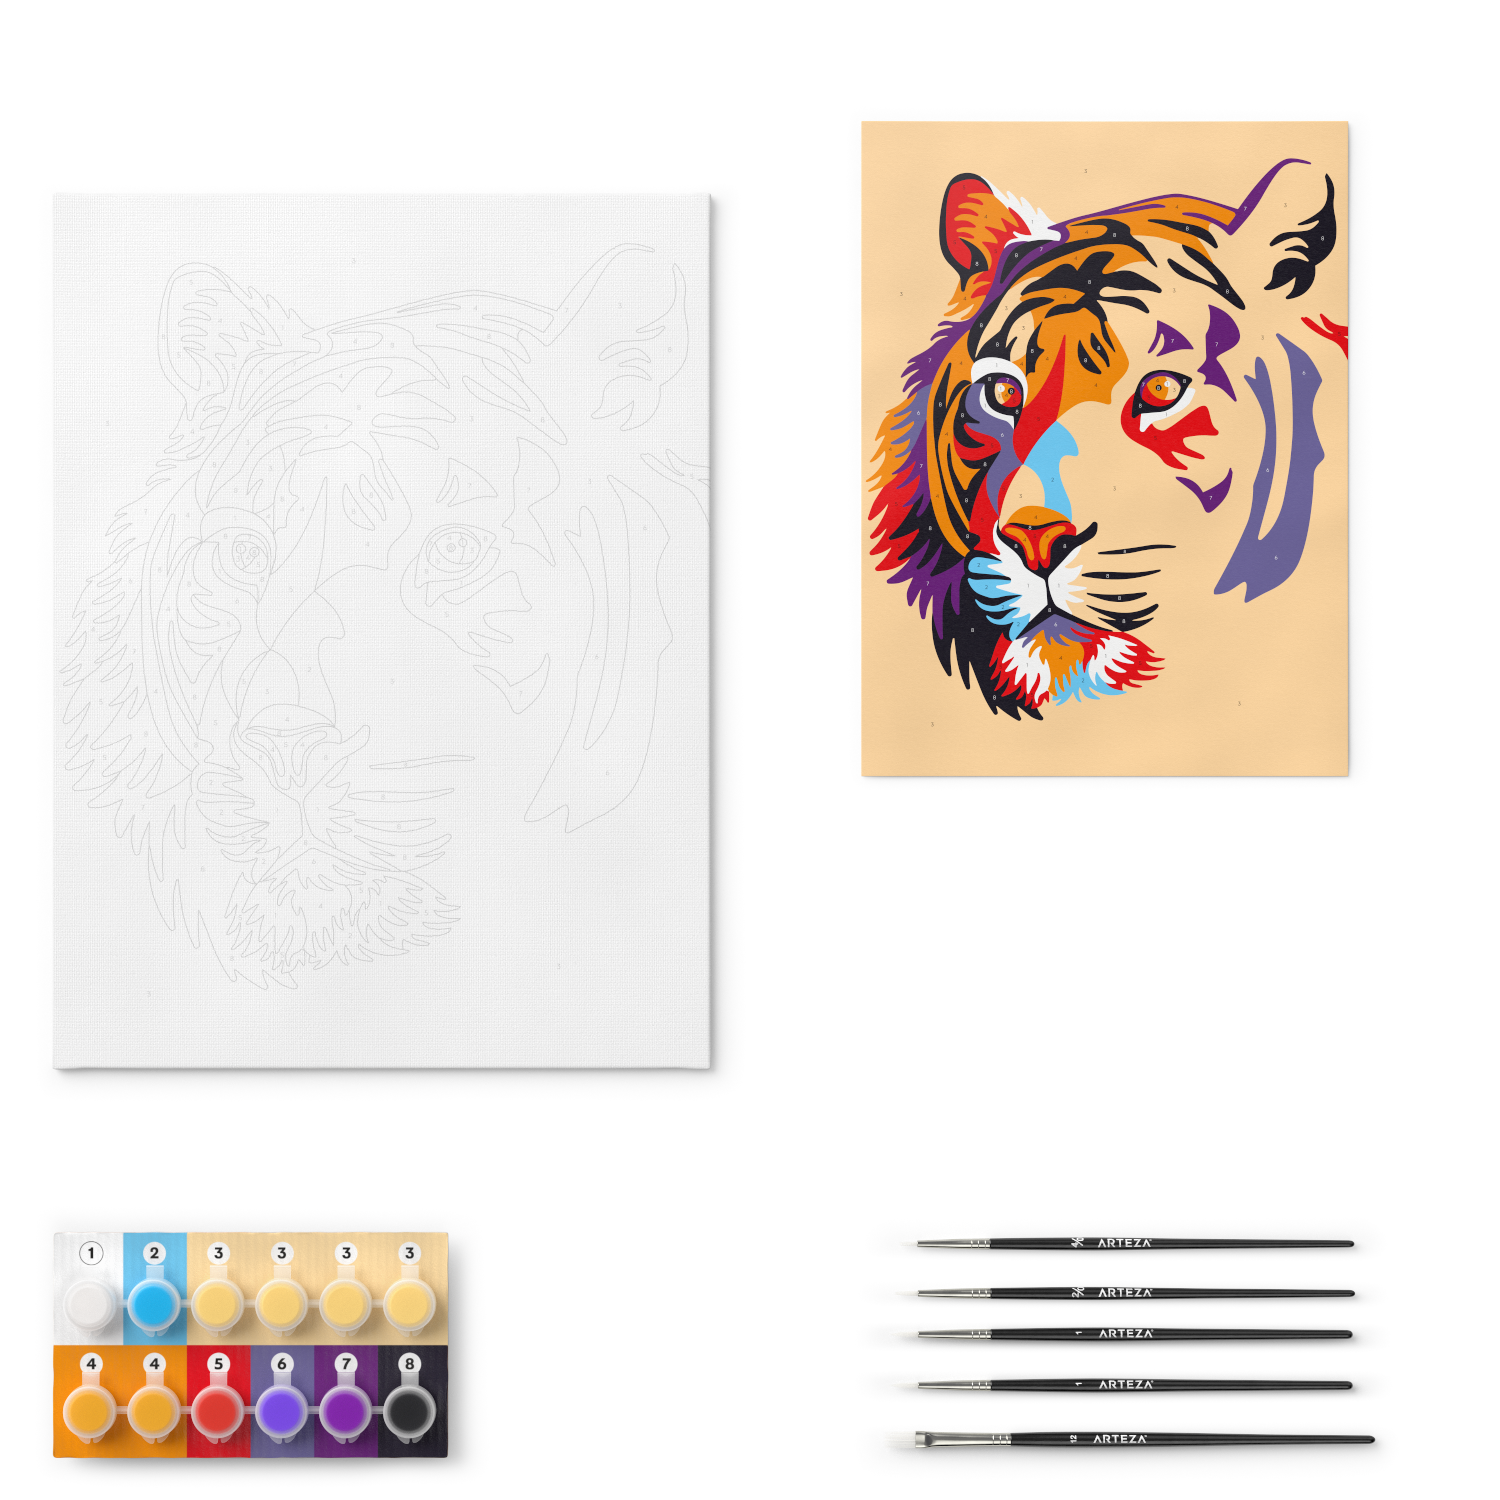 Paint by Numbers, Tiger - Beginner Level Kit